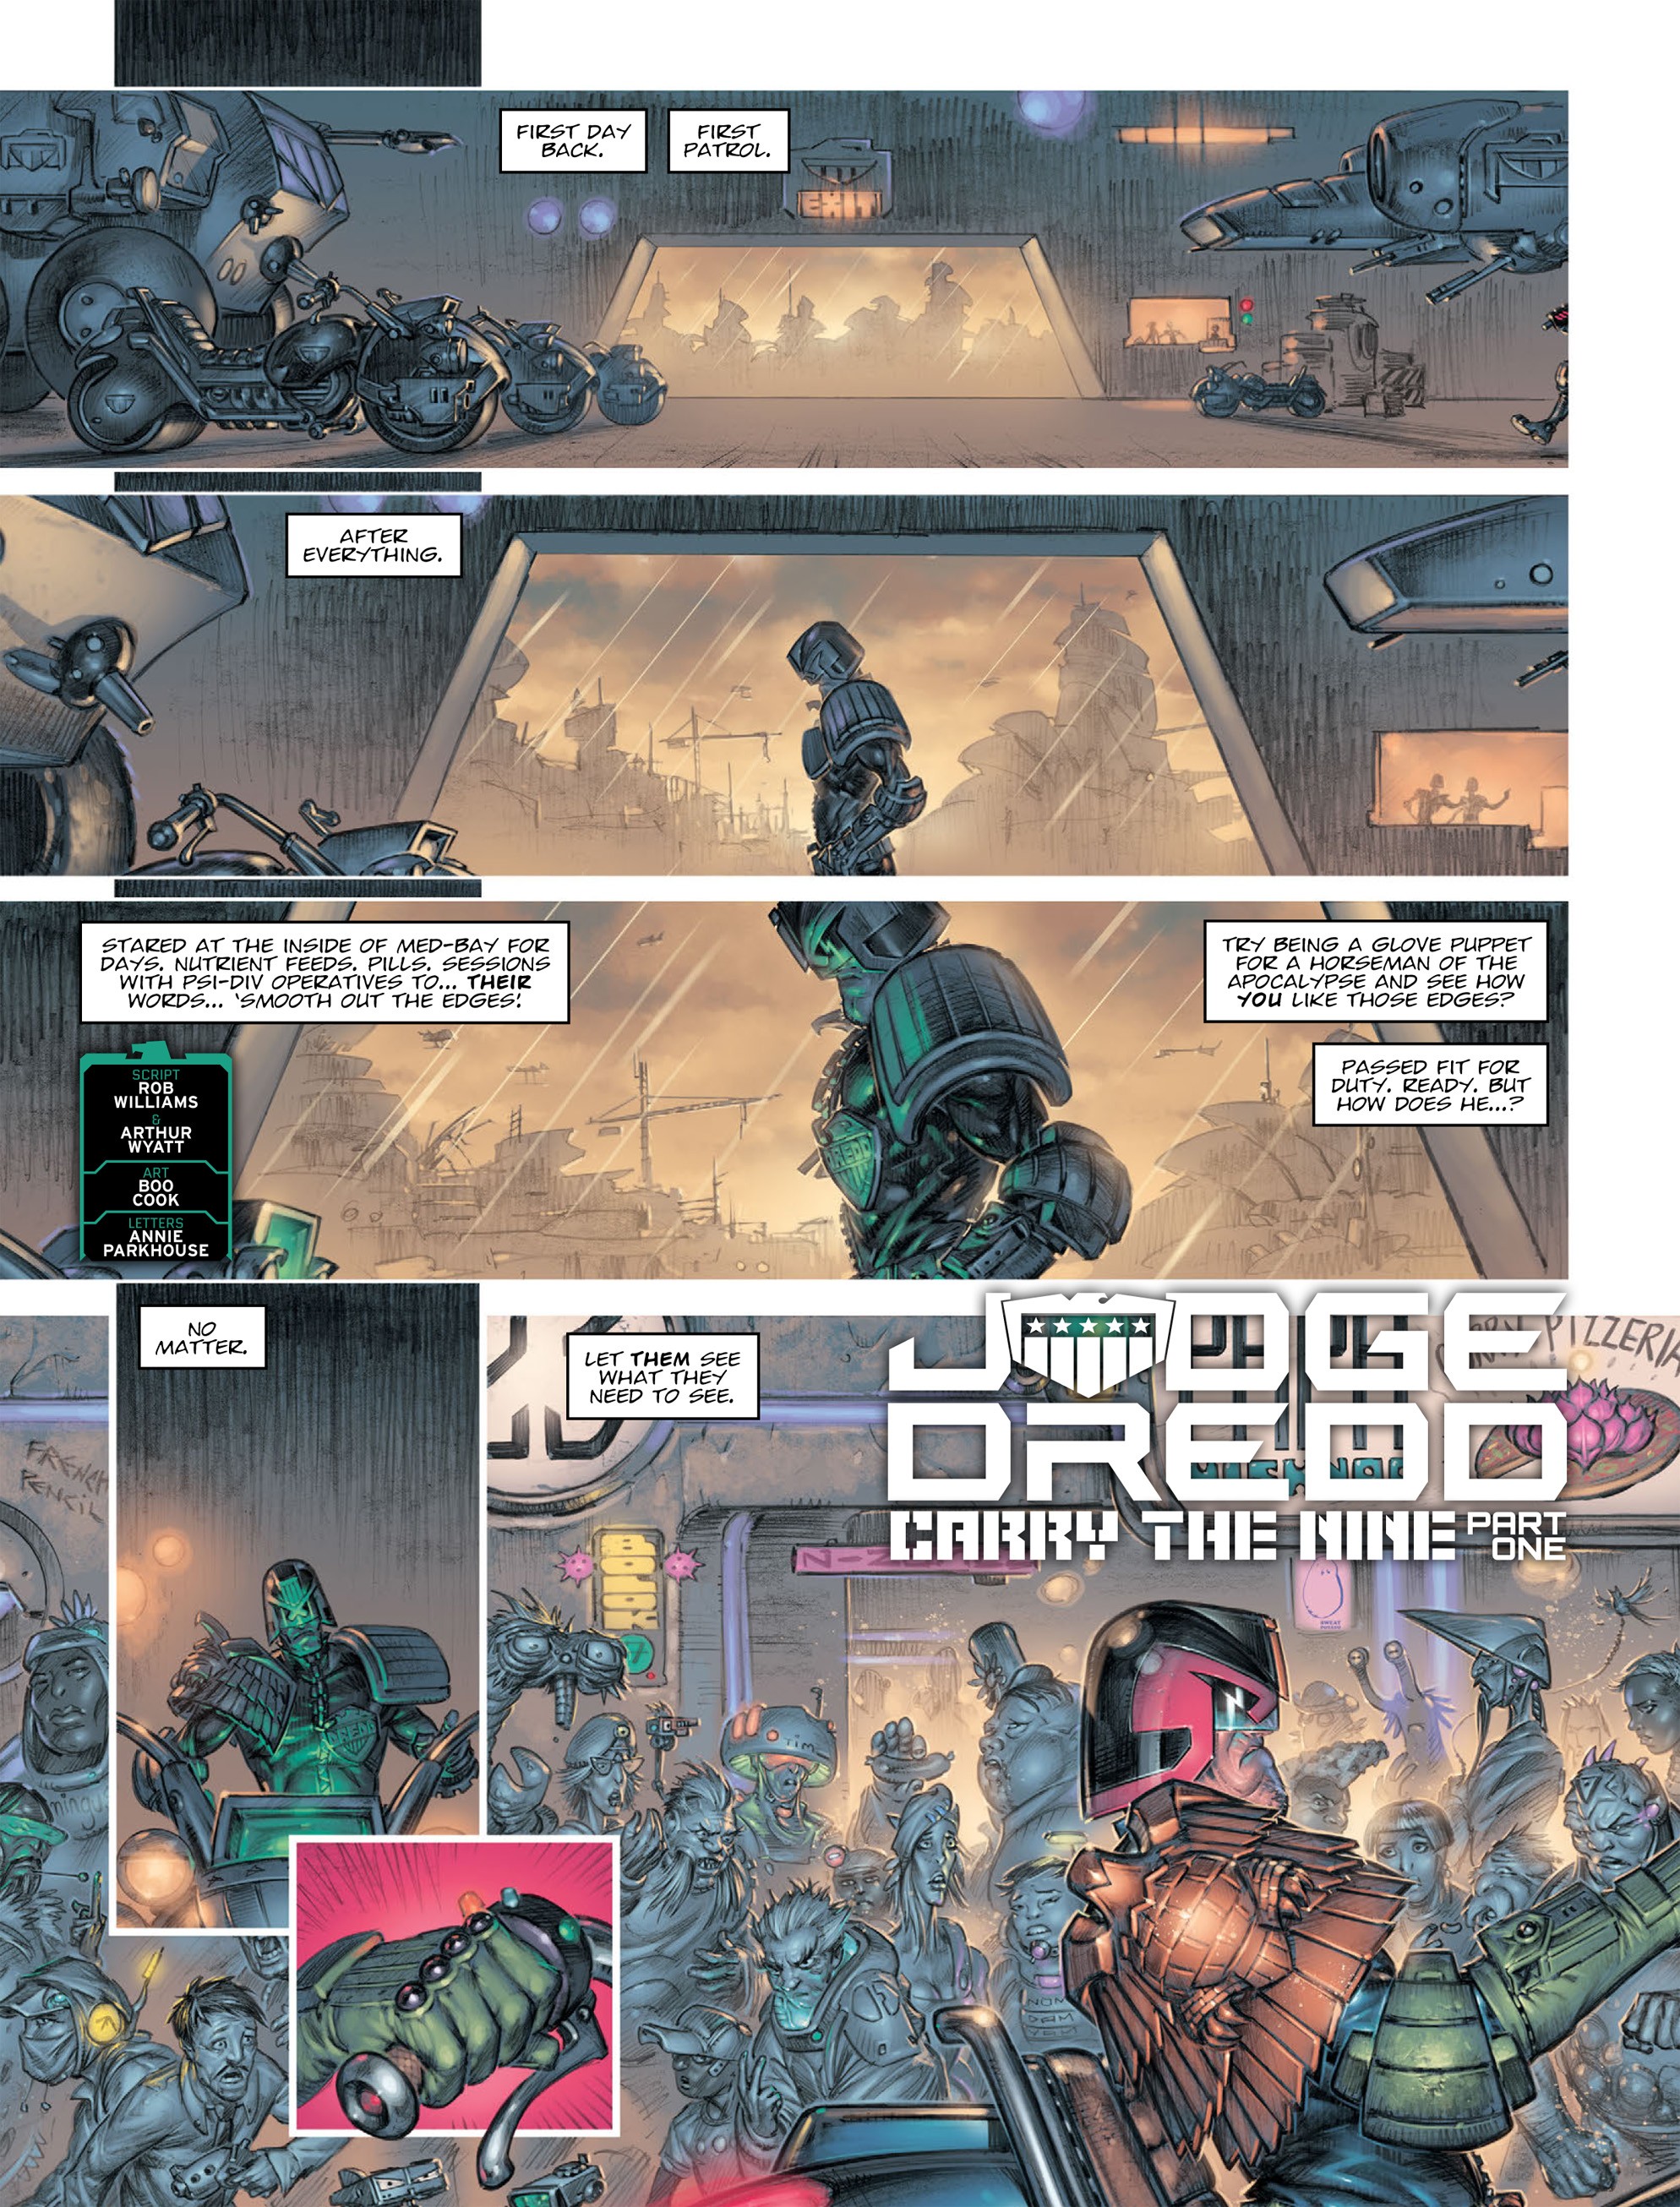 2000 AD: Chapter 2200 - Page 3